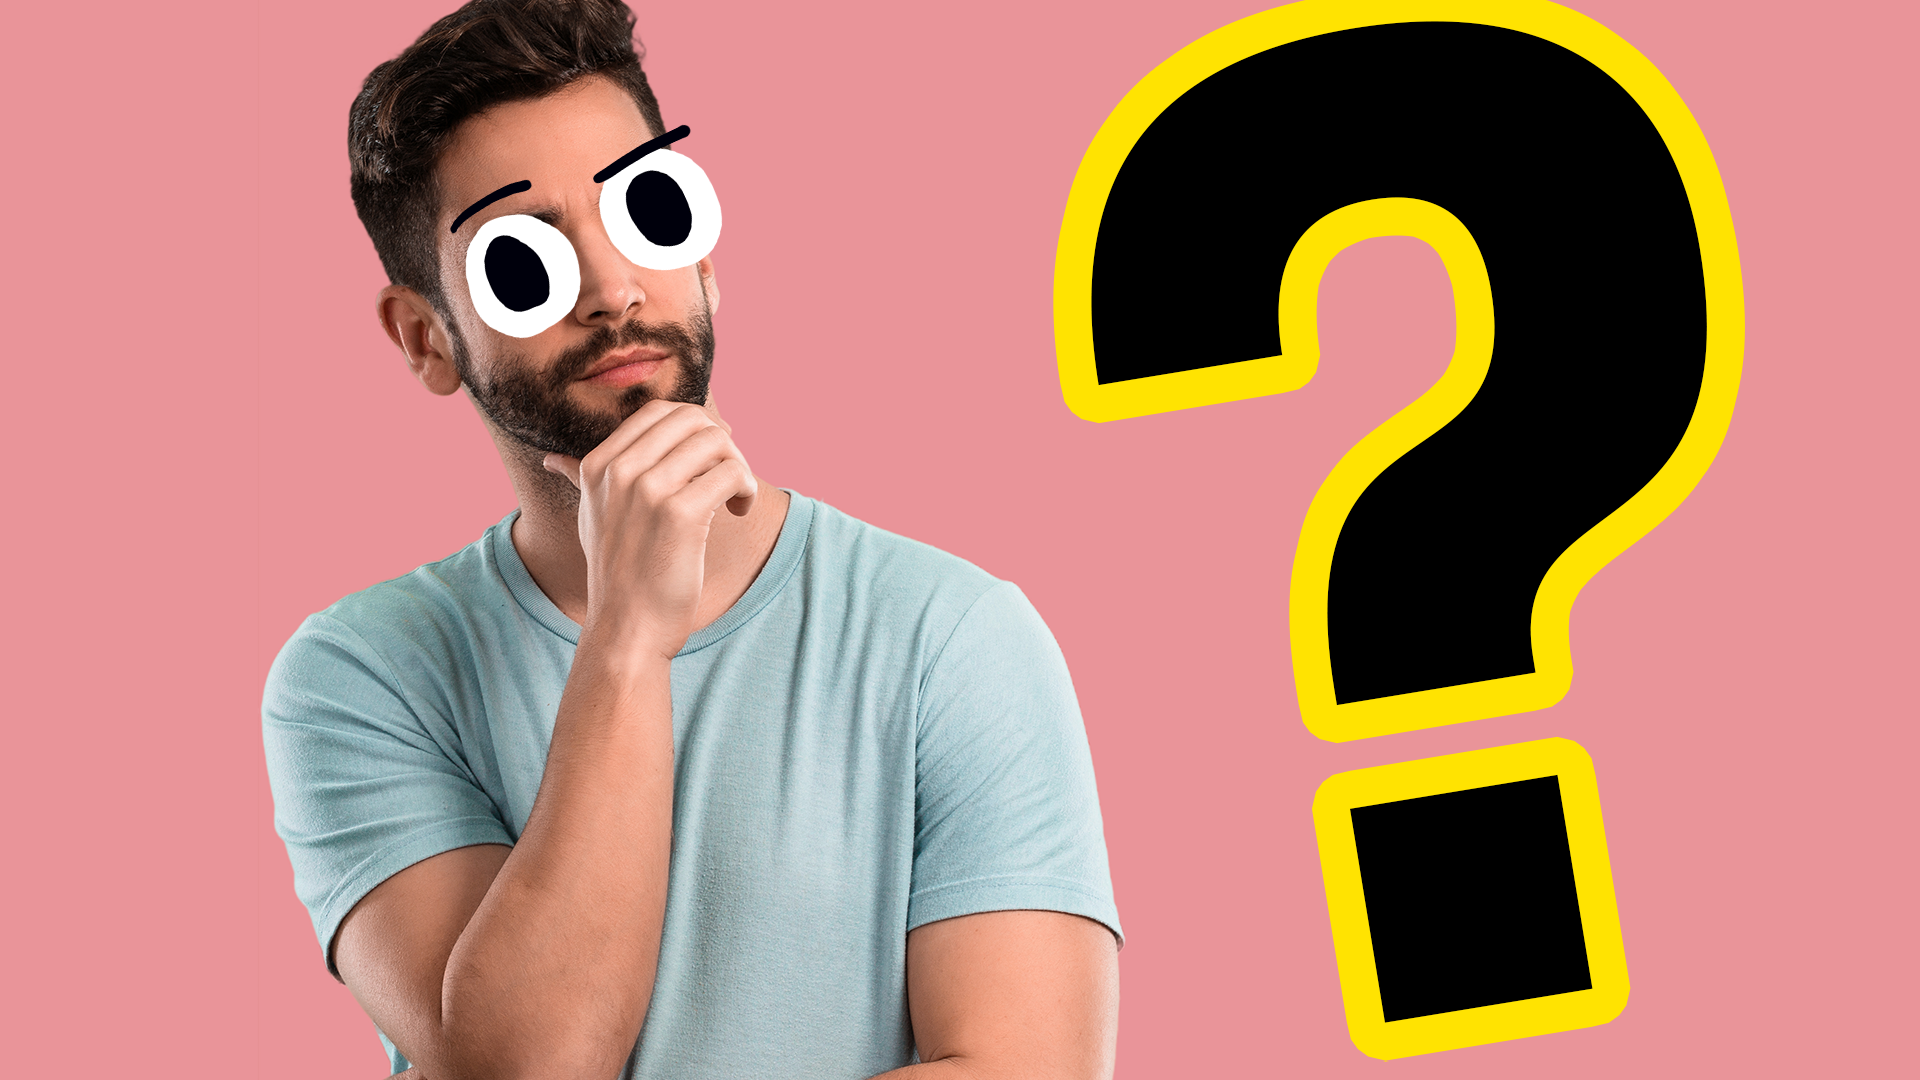 Man thinking with question mark on pink background